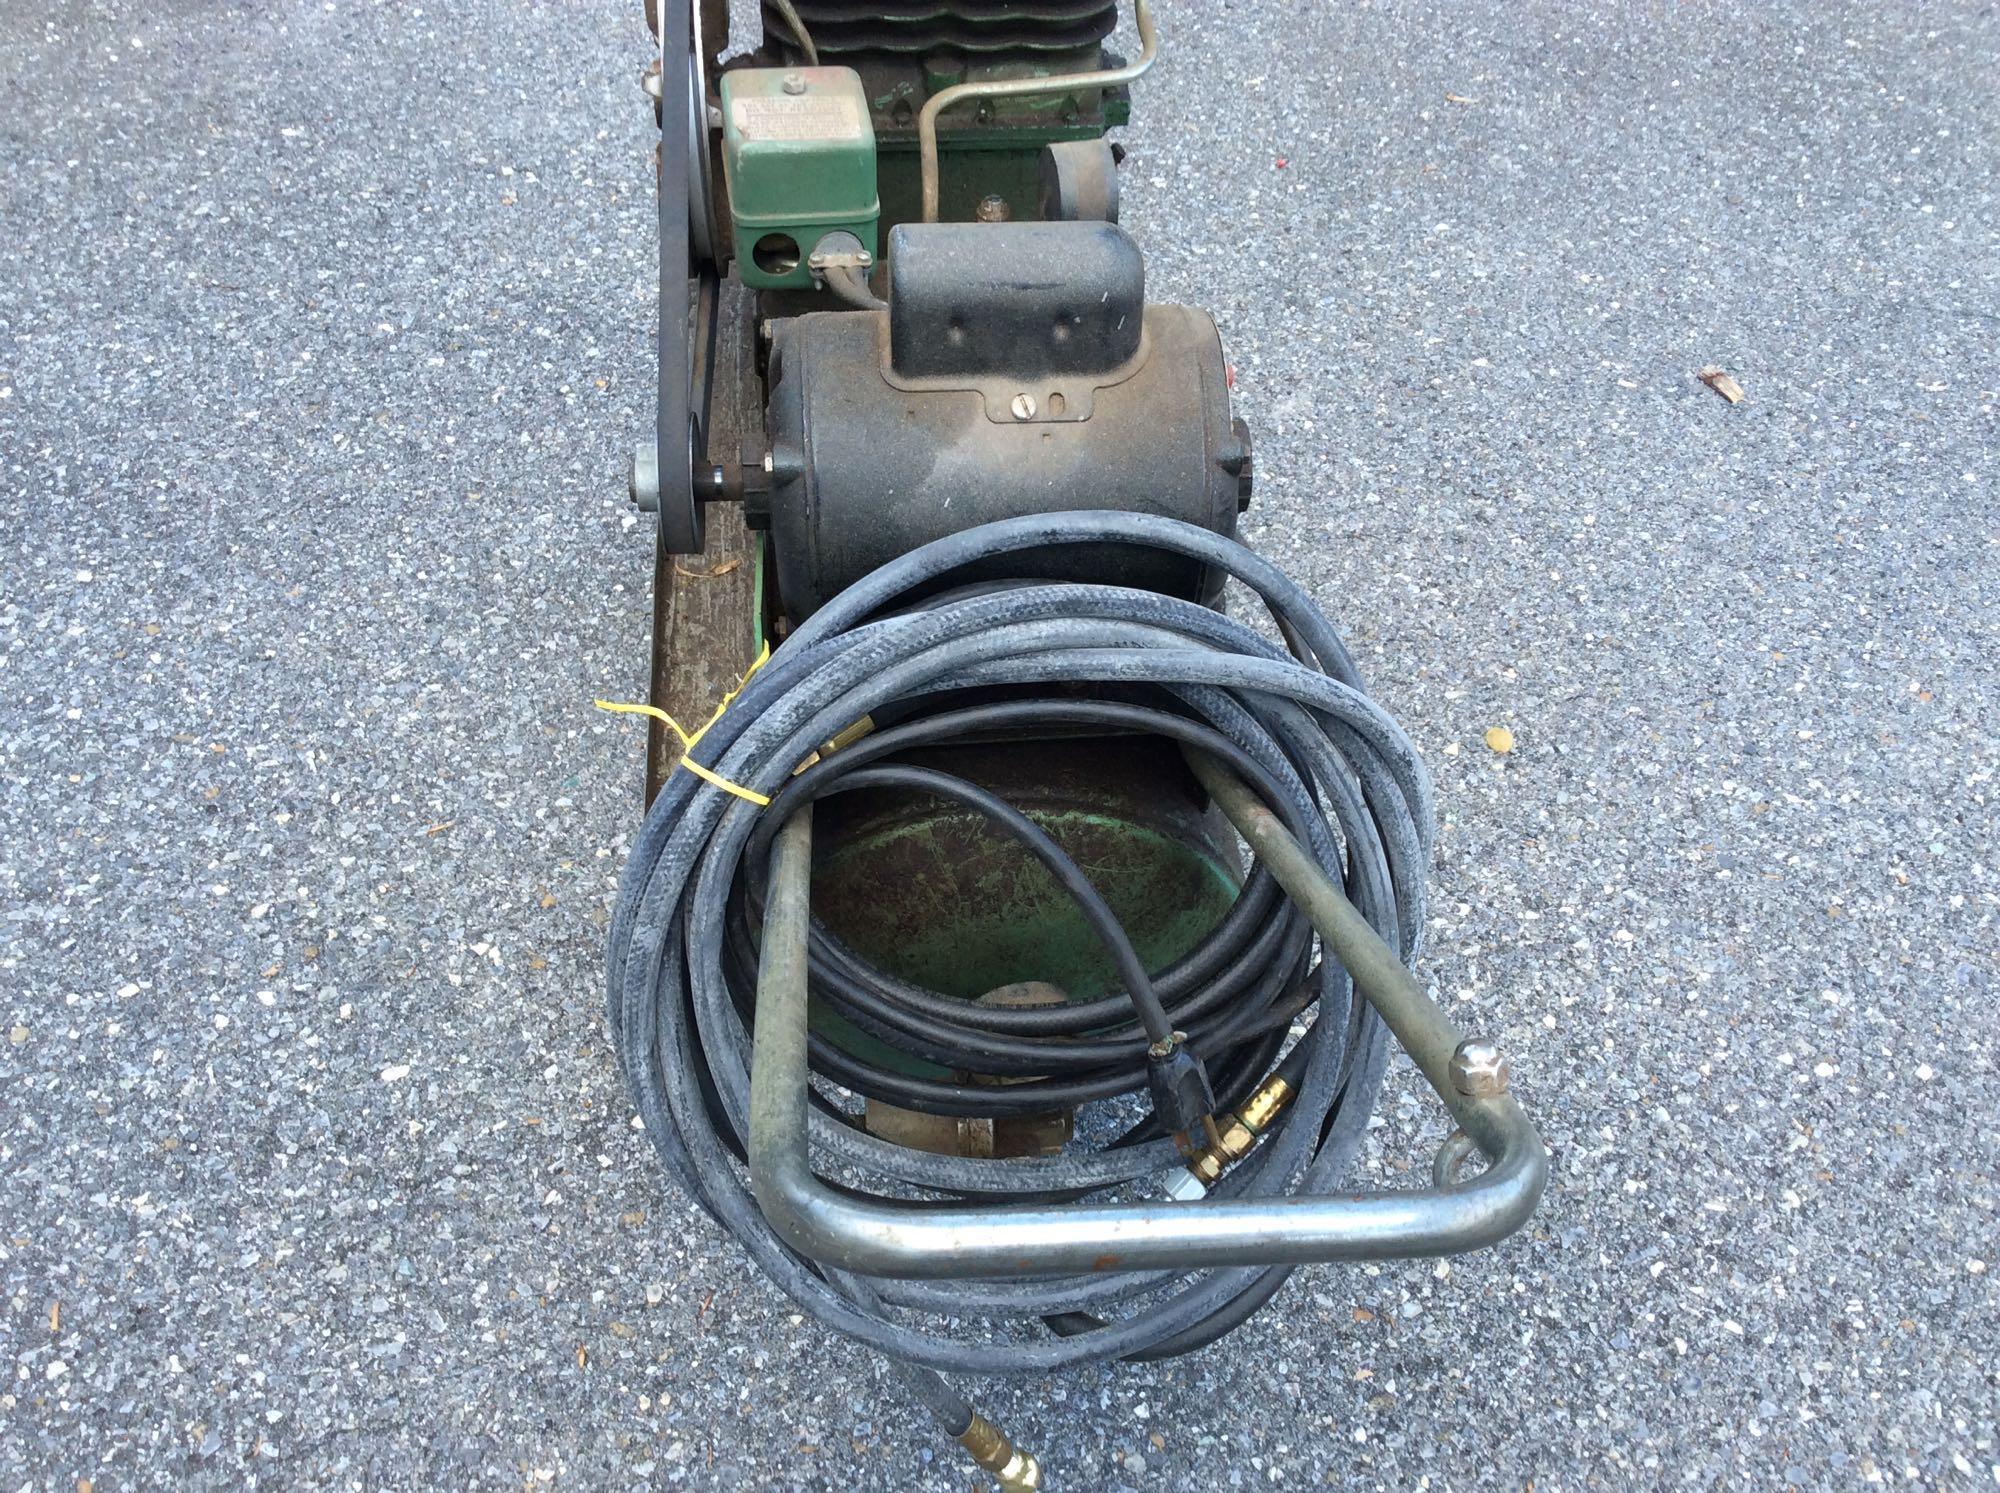 3/4 HP air compressor with hose in working condition